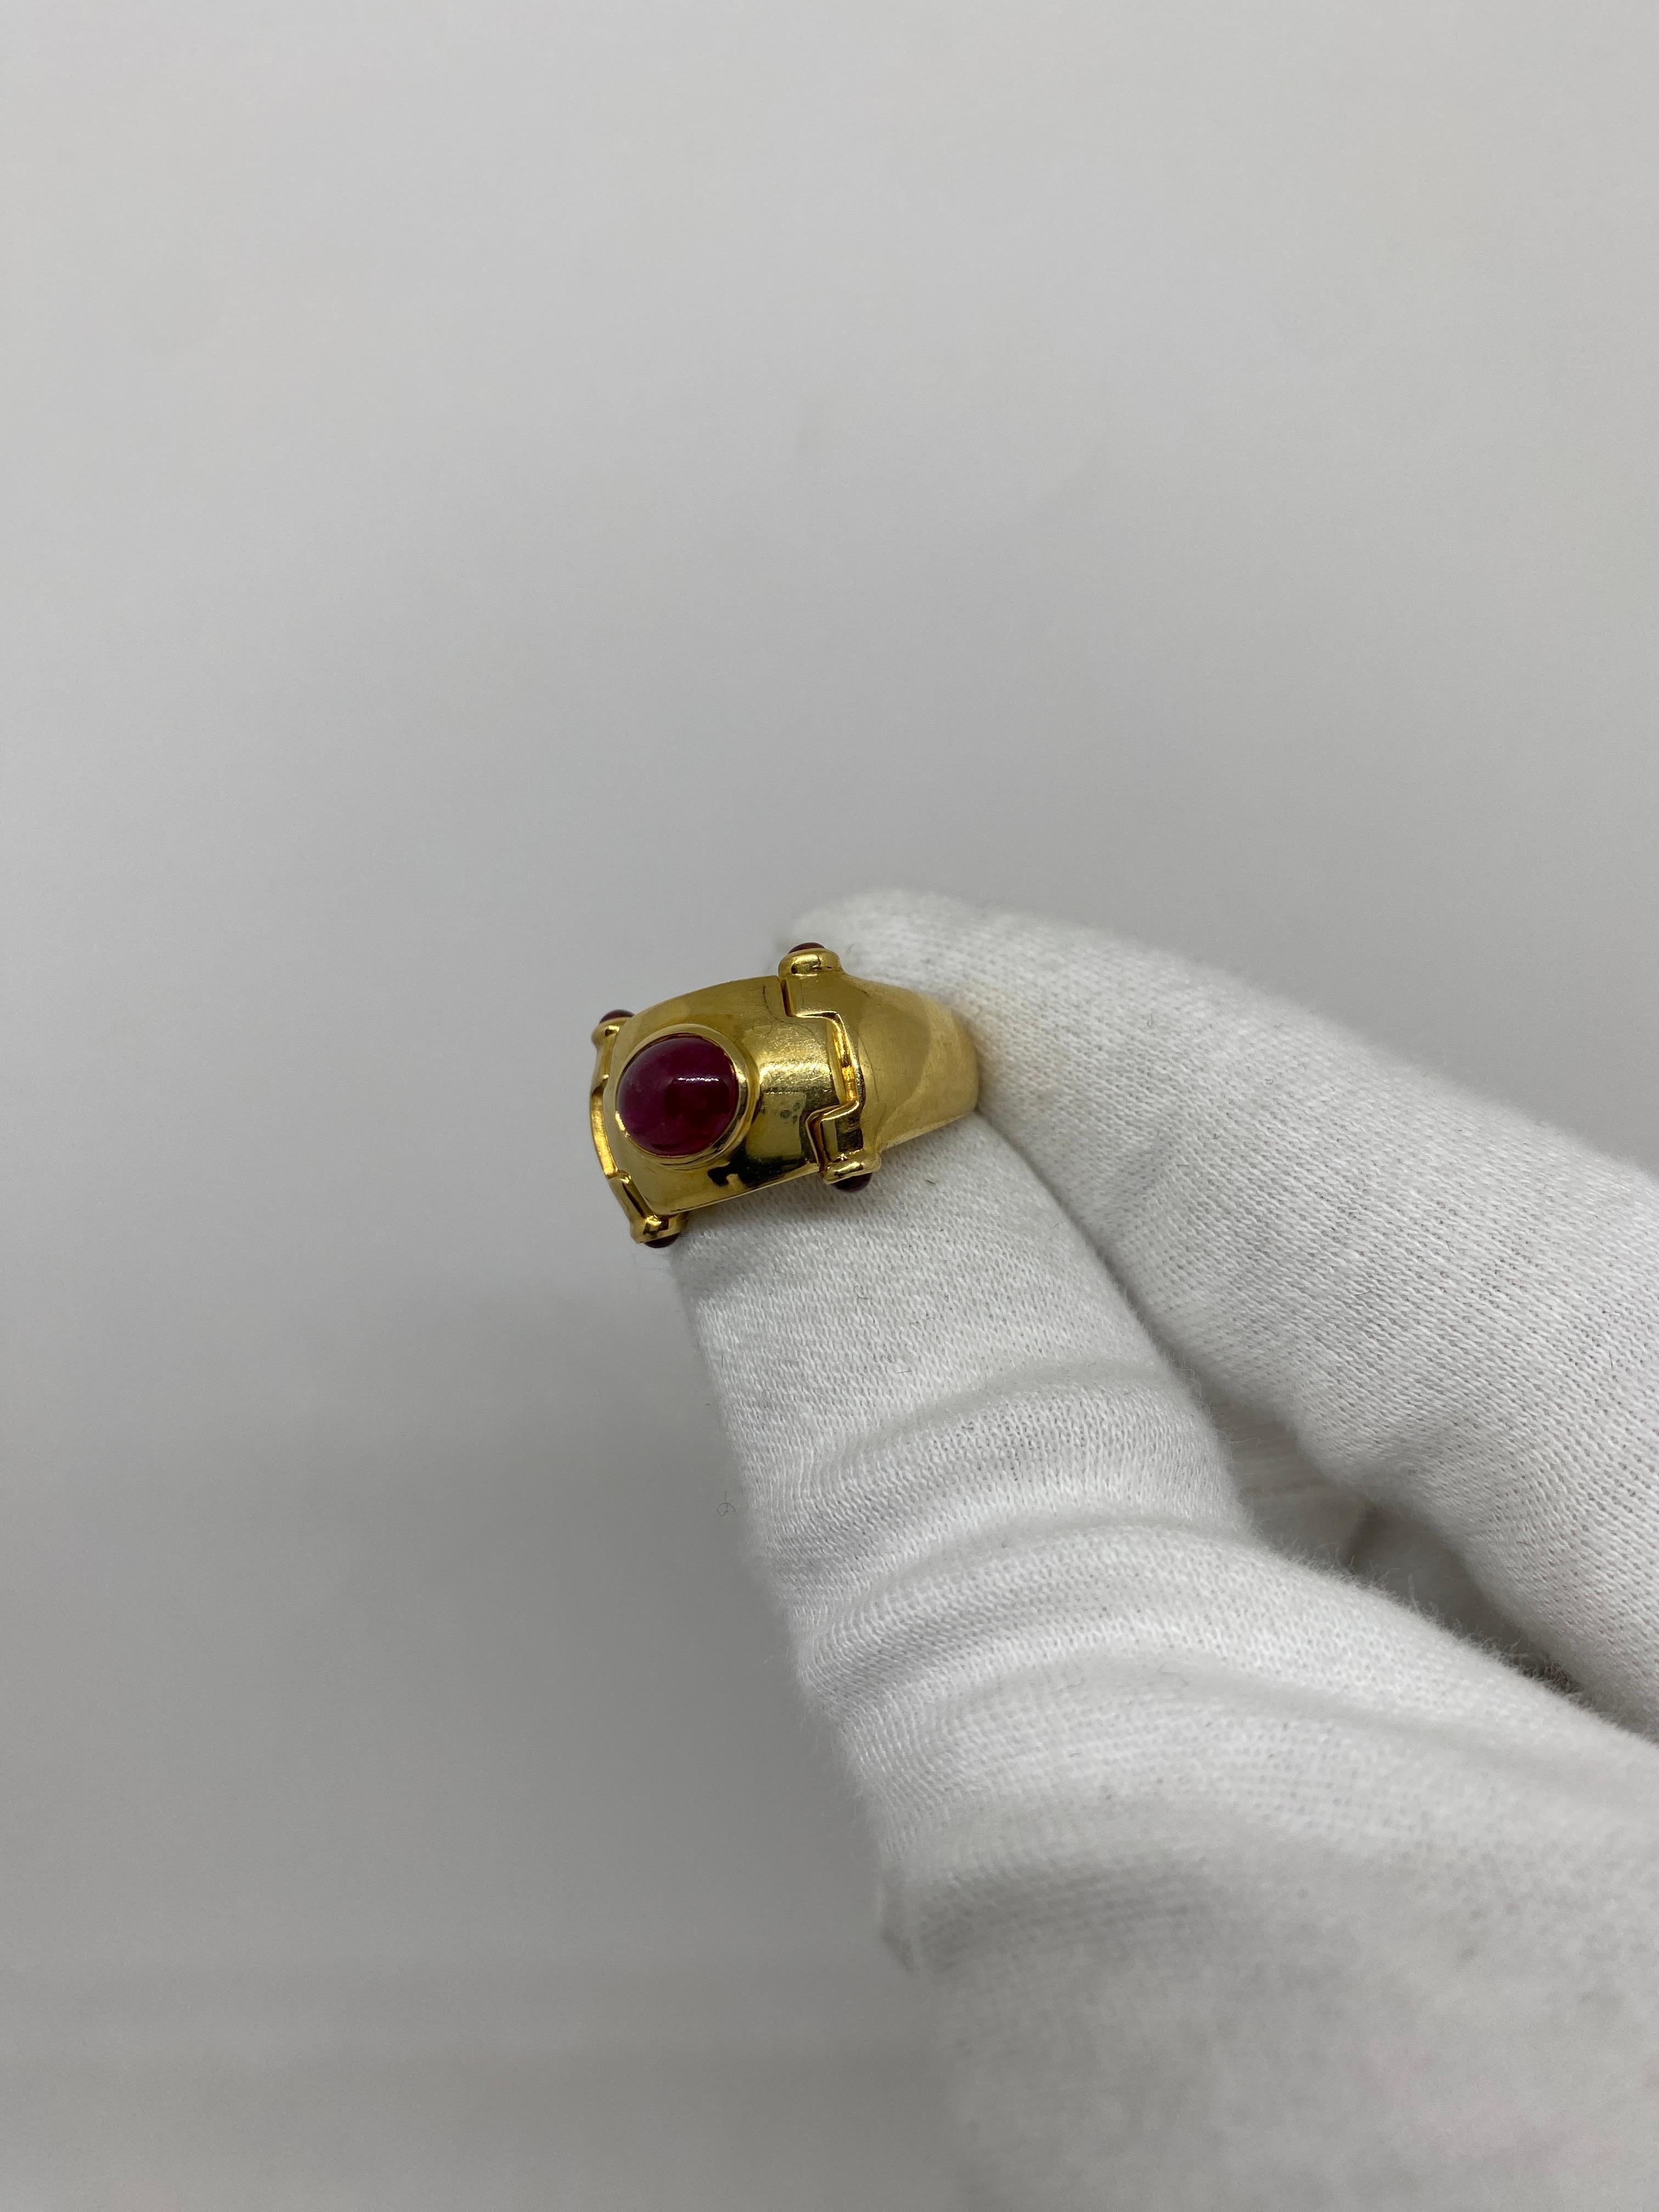 Ring made of 18kt yellow gold with cabochon-cut red ruby

Welcome to our jewelry collection, where every piece tells a story of timeless elegance and unparalleled craftsmanship. As a family-run business in Italy for over 100 years, we pride